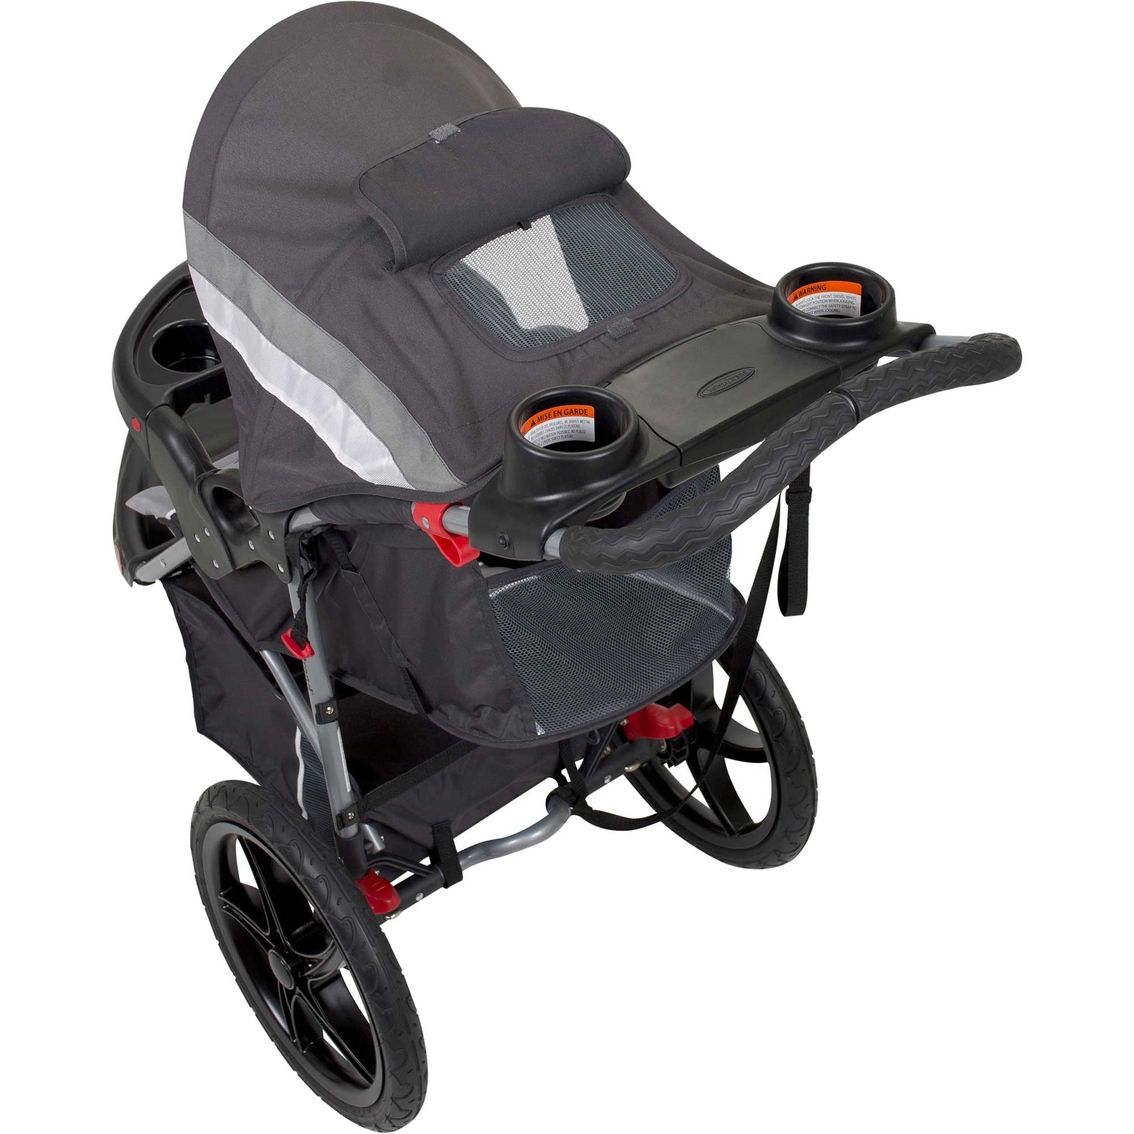 Baby Trend Range Jogger Liberty Travel System - Image 4 of 5